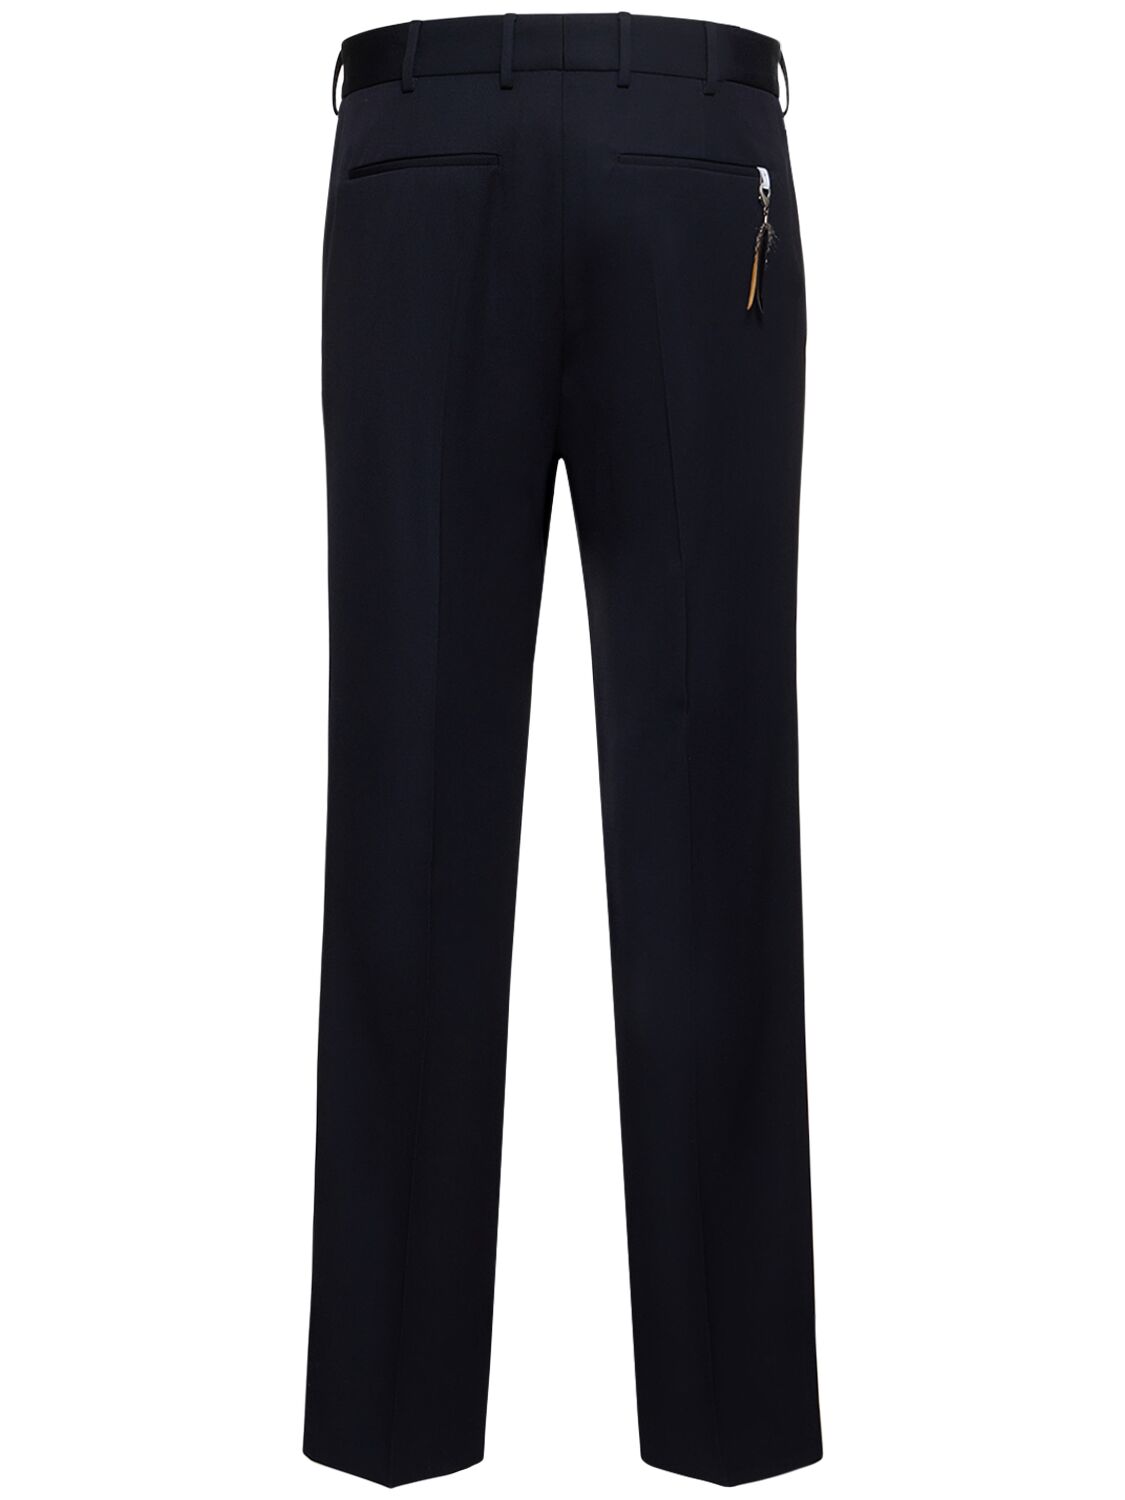 Shop Pt Torino Freedom Flat Front Wool Pants In Navy